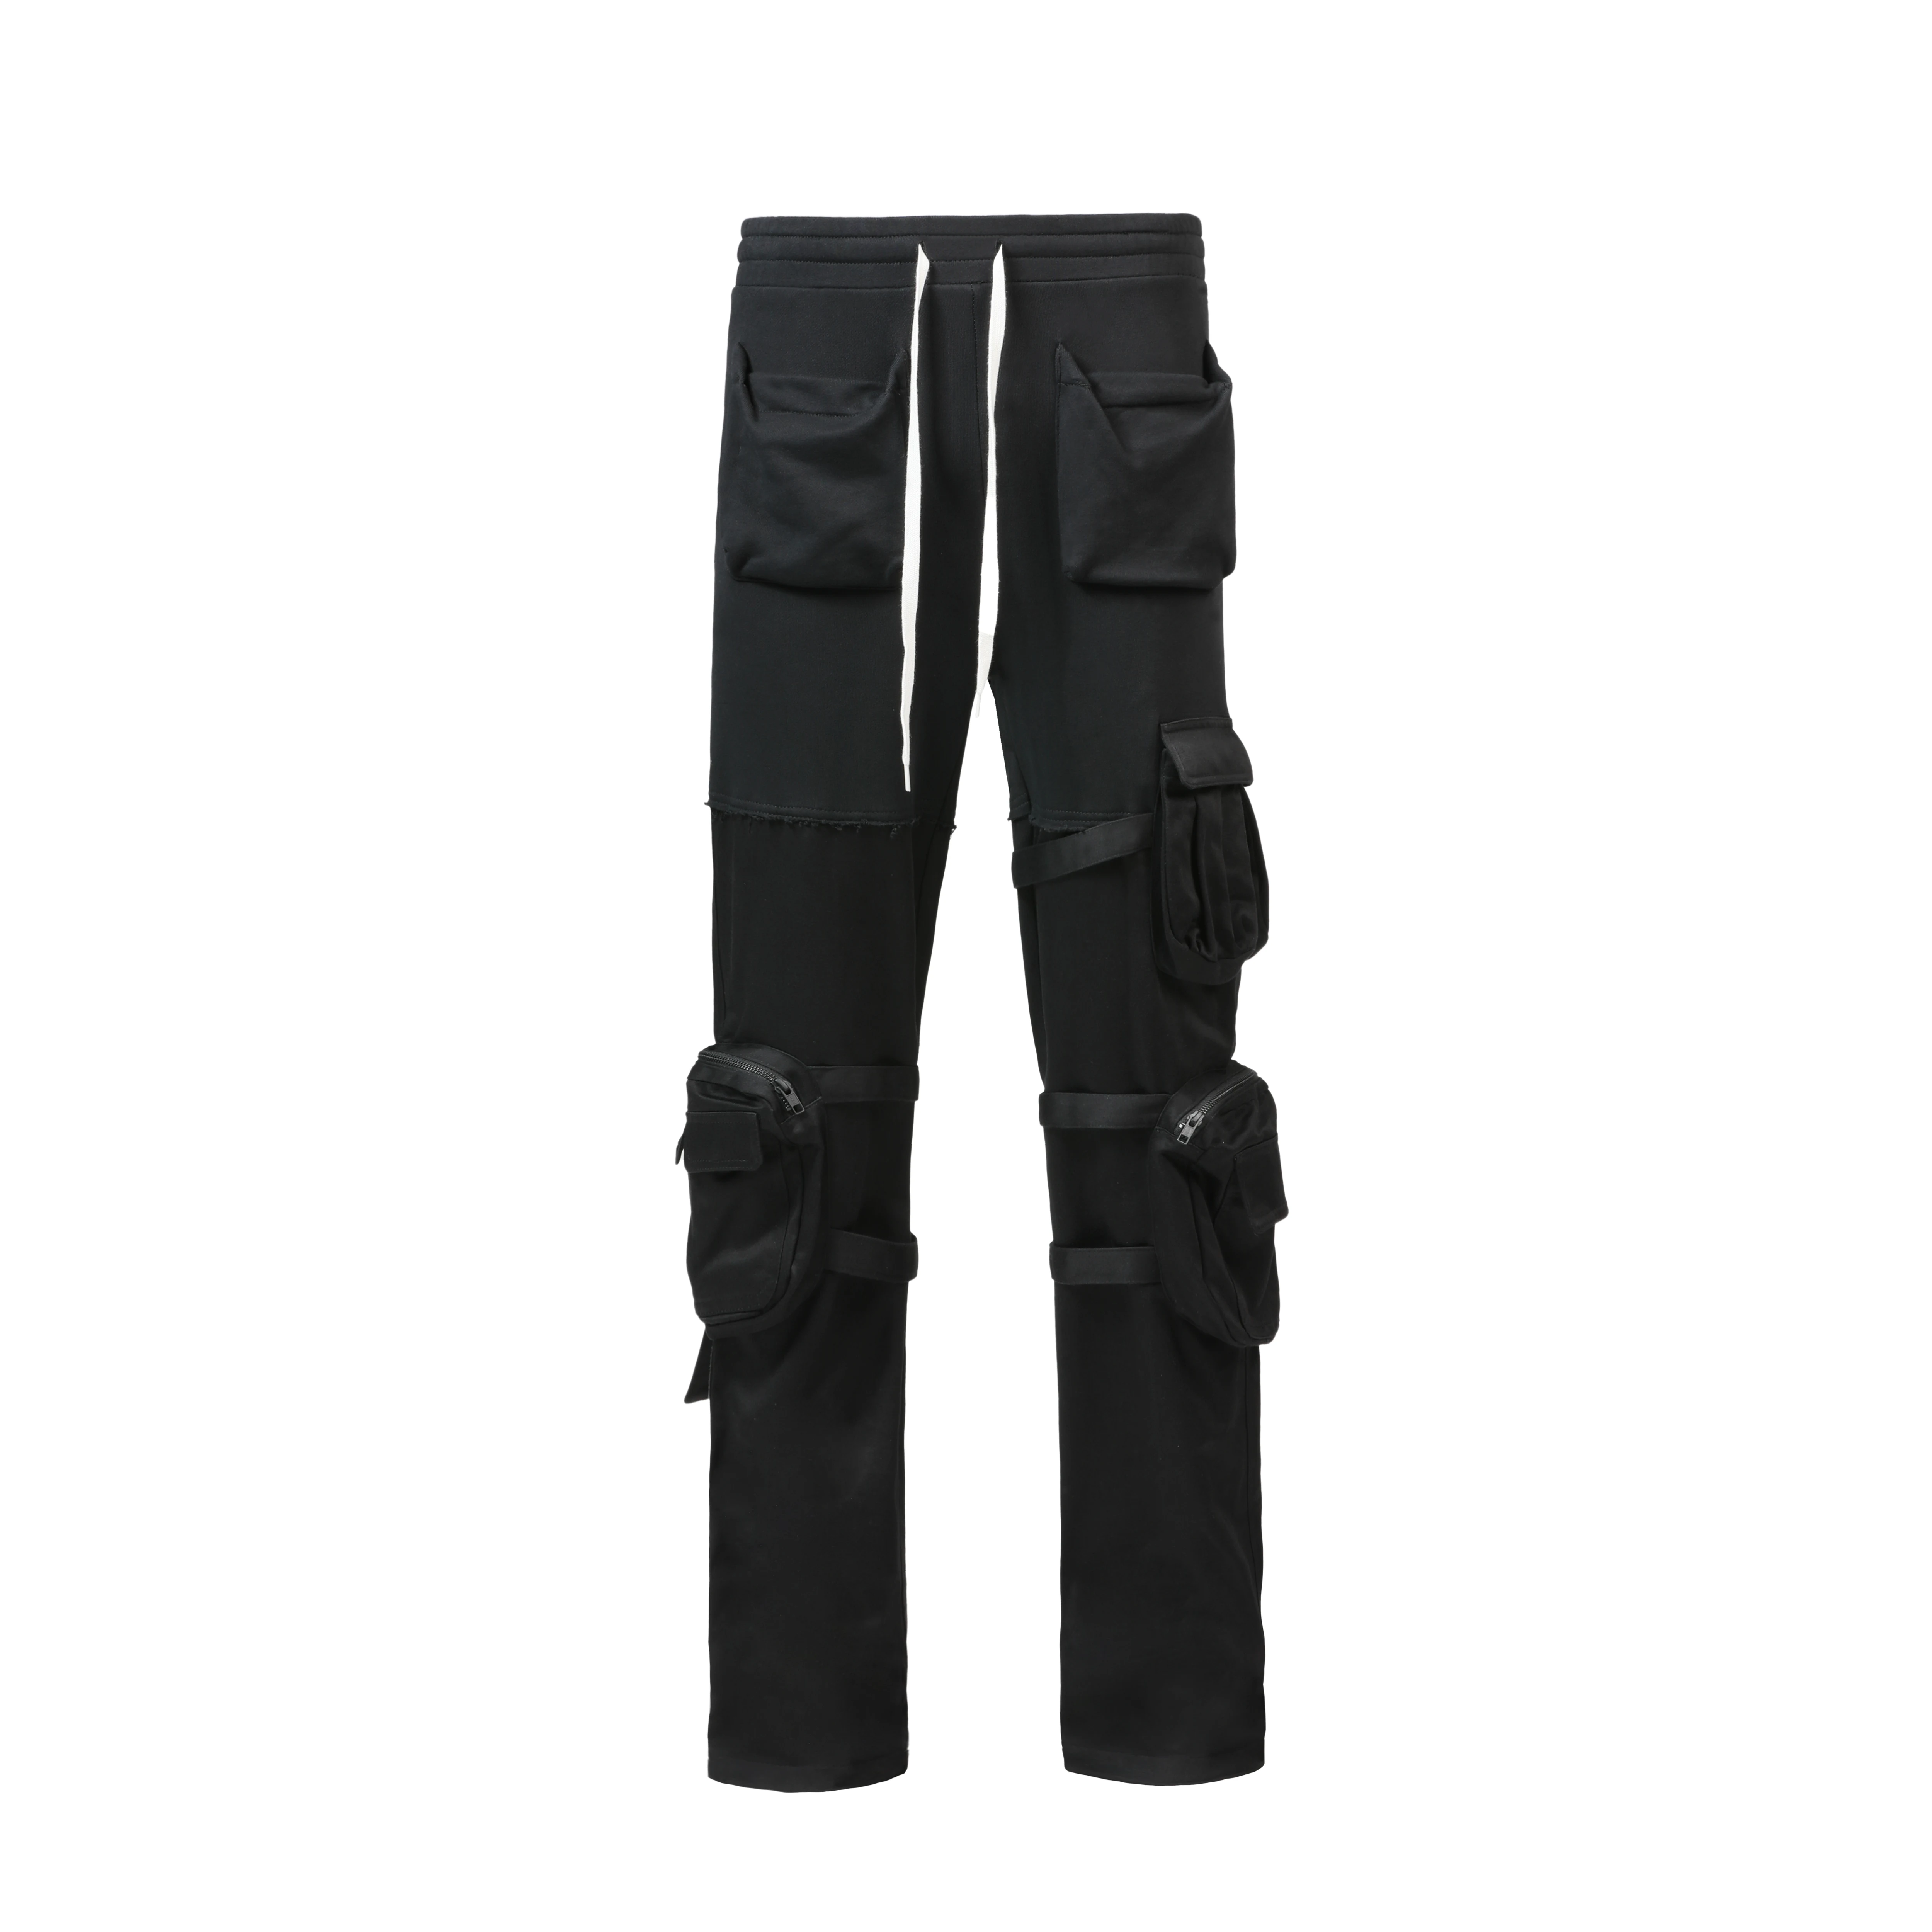 2022 Men Women Clothing Yamamoto Style Street Overalls Functional Splicing Stereo multi Pocket Pants Plus Size Costume 27-46